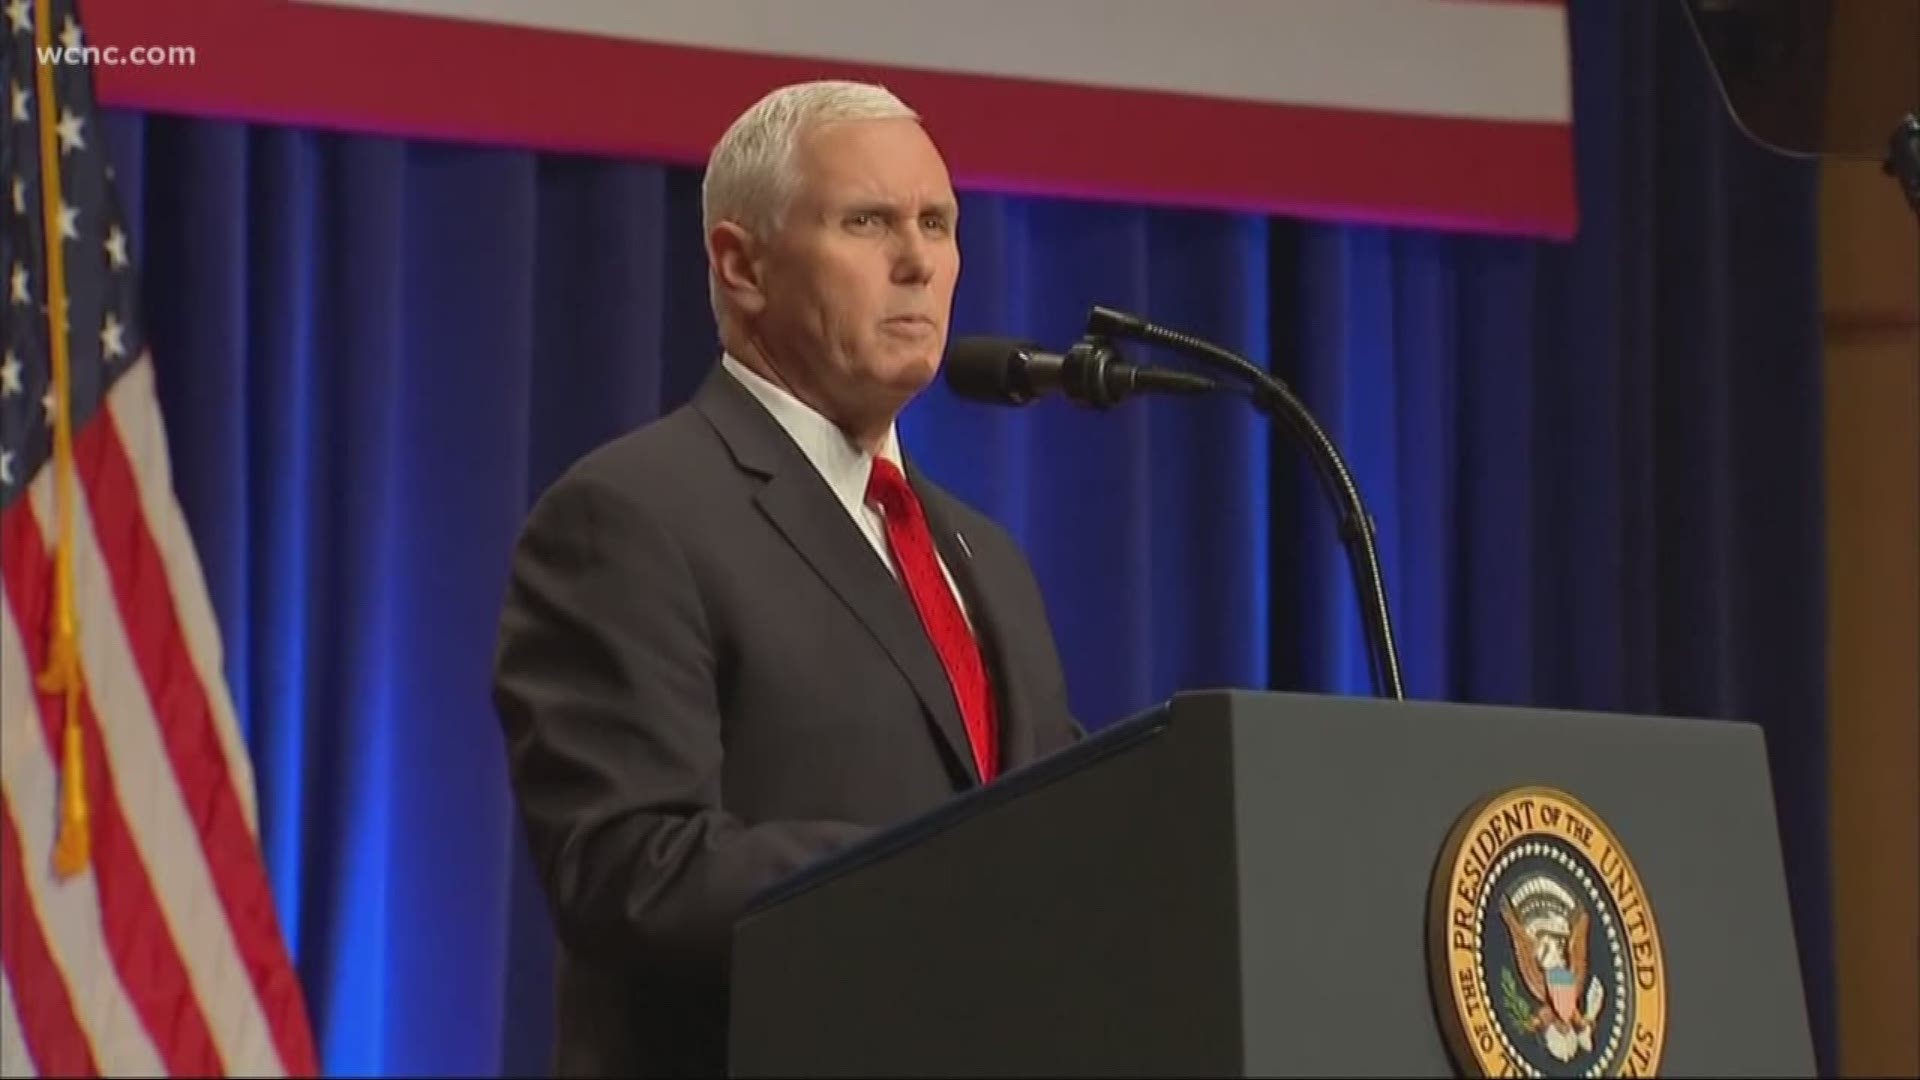 Vice President Pence to speak at Pittenger event in Charlotte